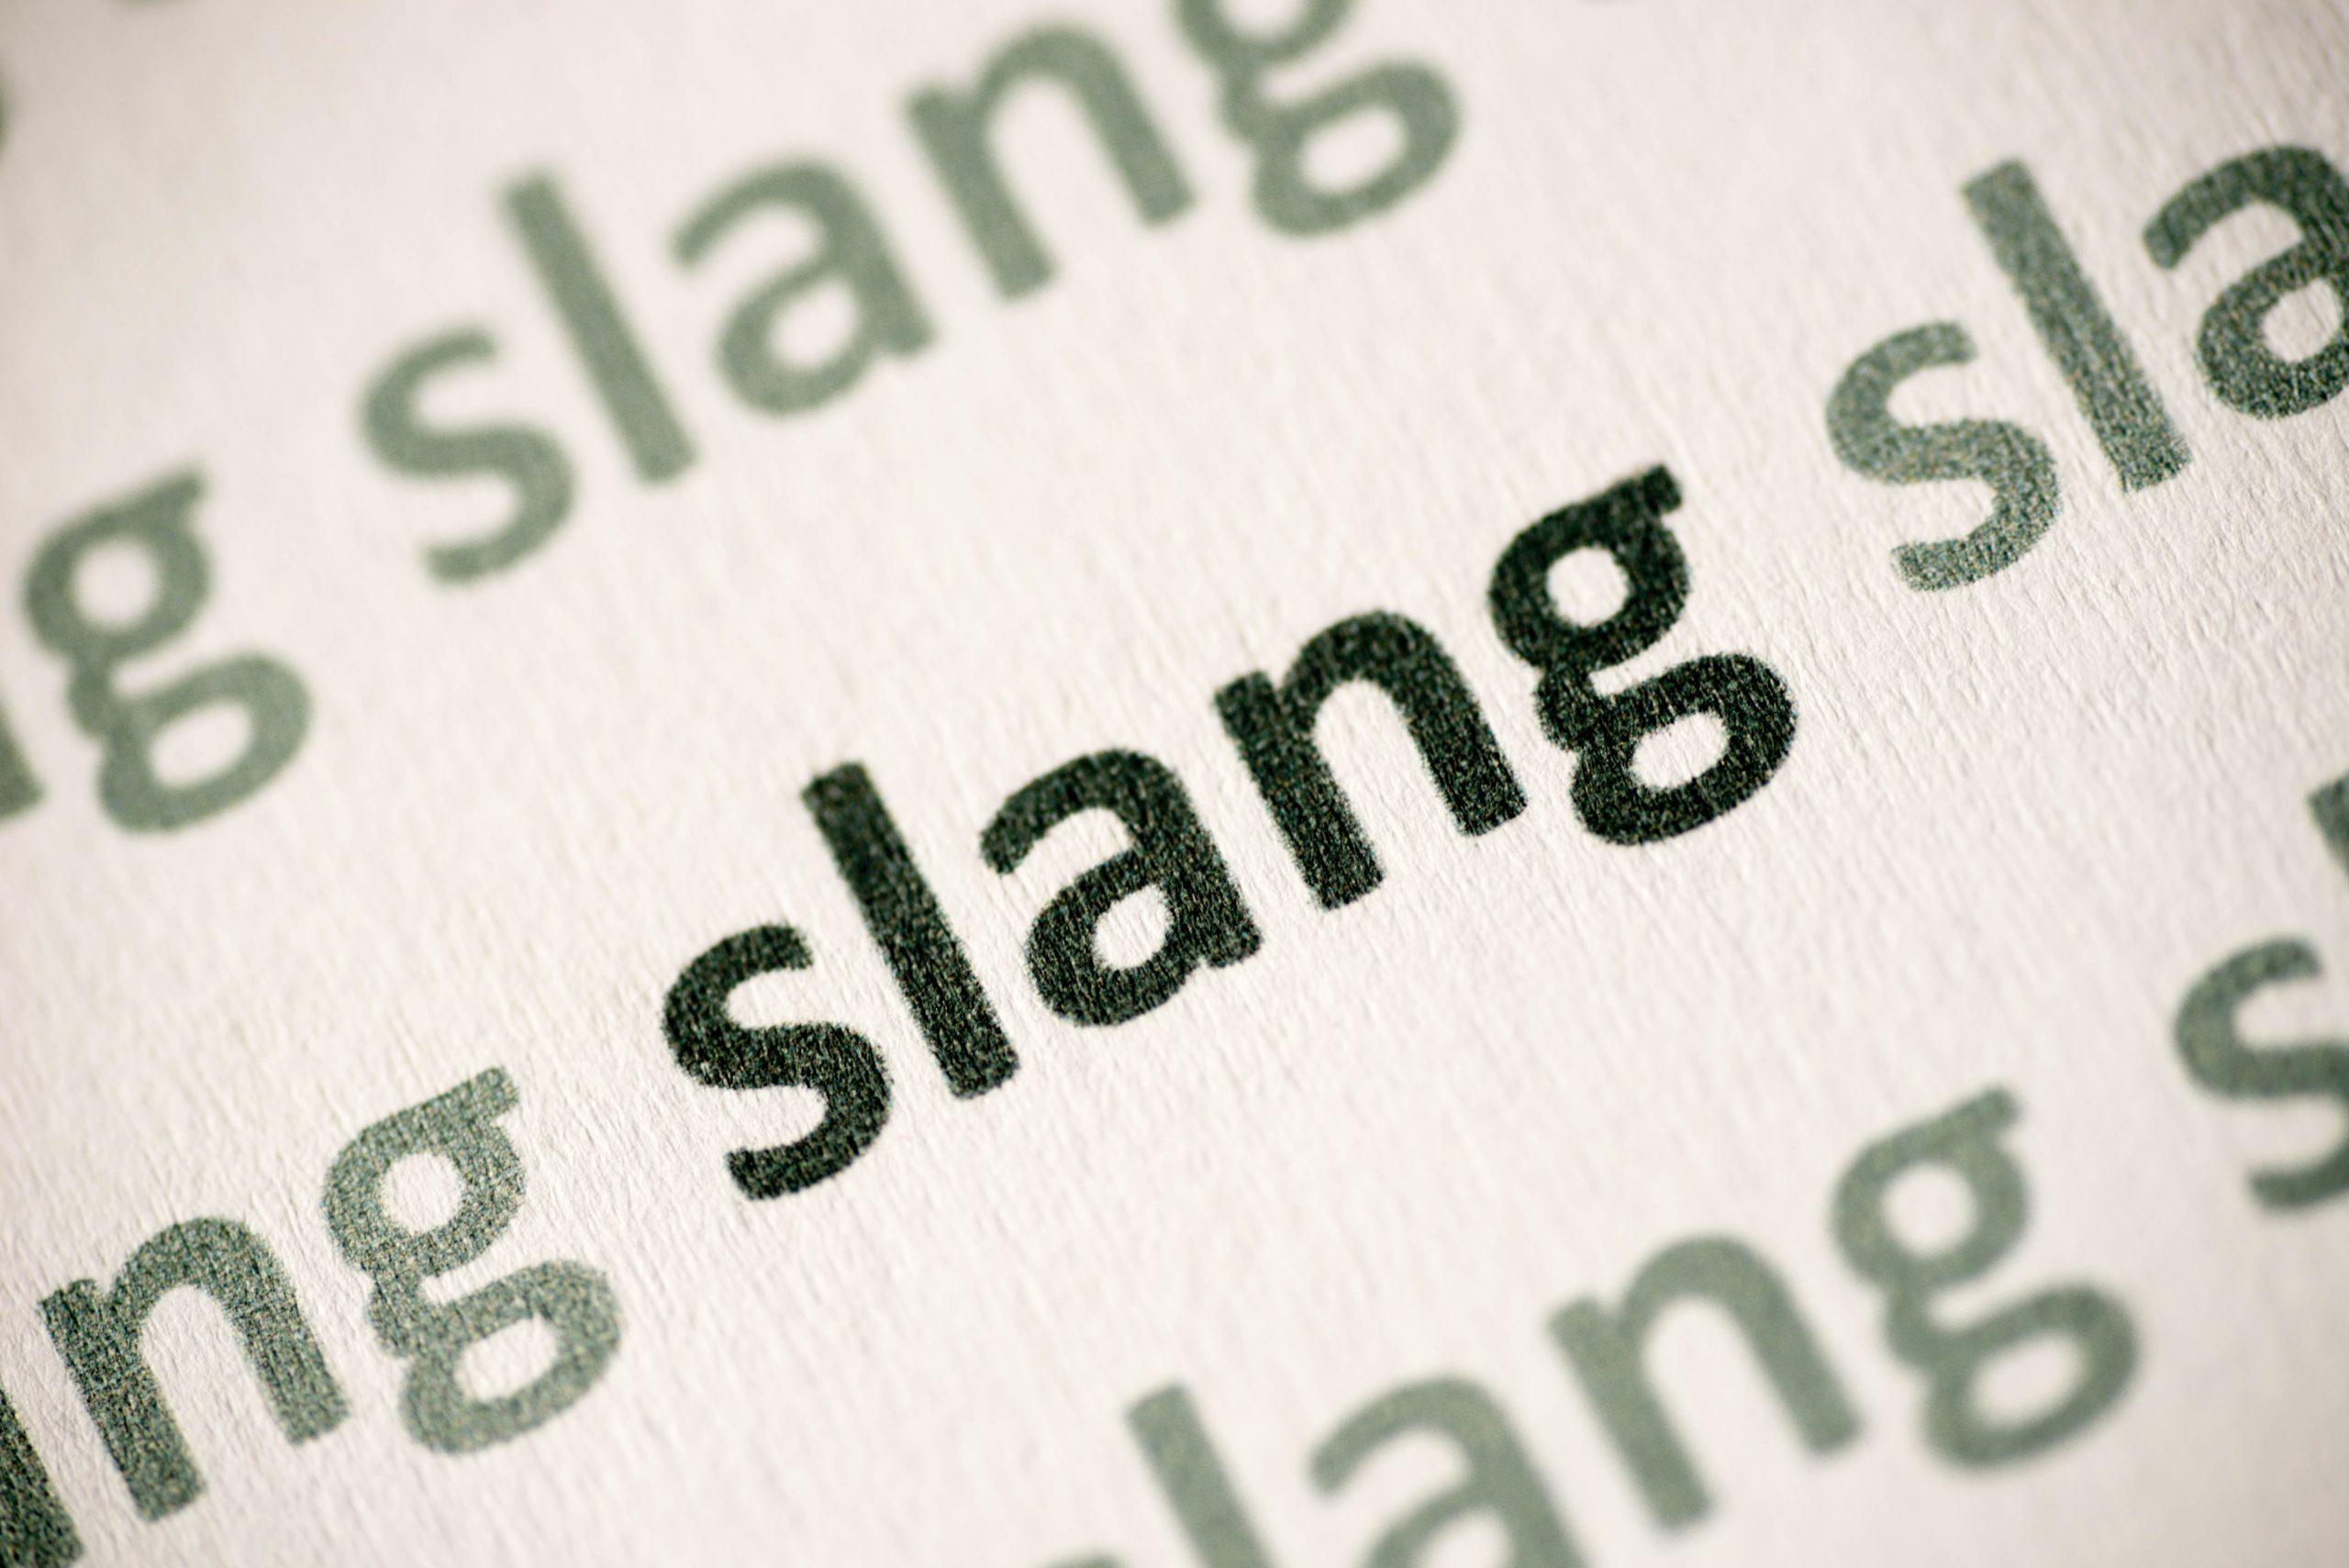 New Slang Words You'll Be Hearing More of in 2022 Reader's Digest